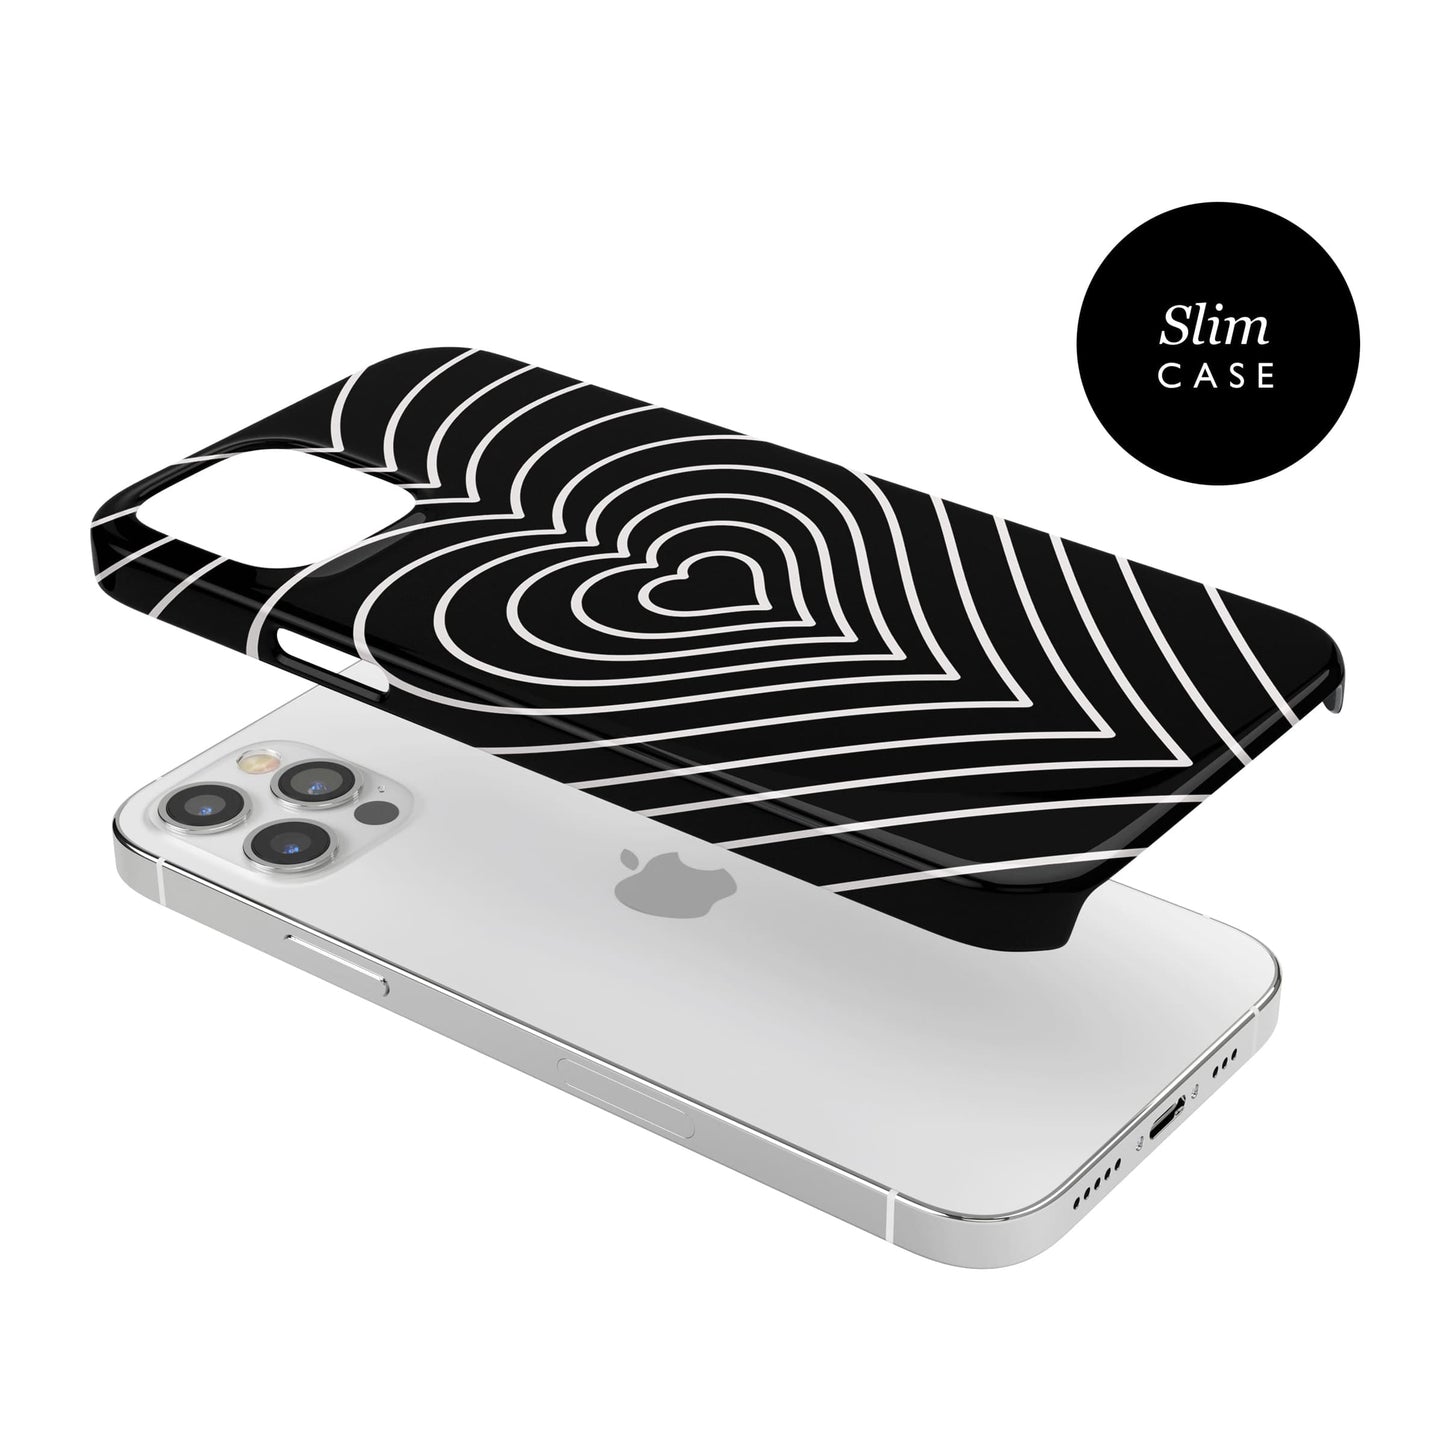 Black and White Heart Swirl Personalised Case  Phone Case